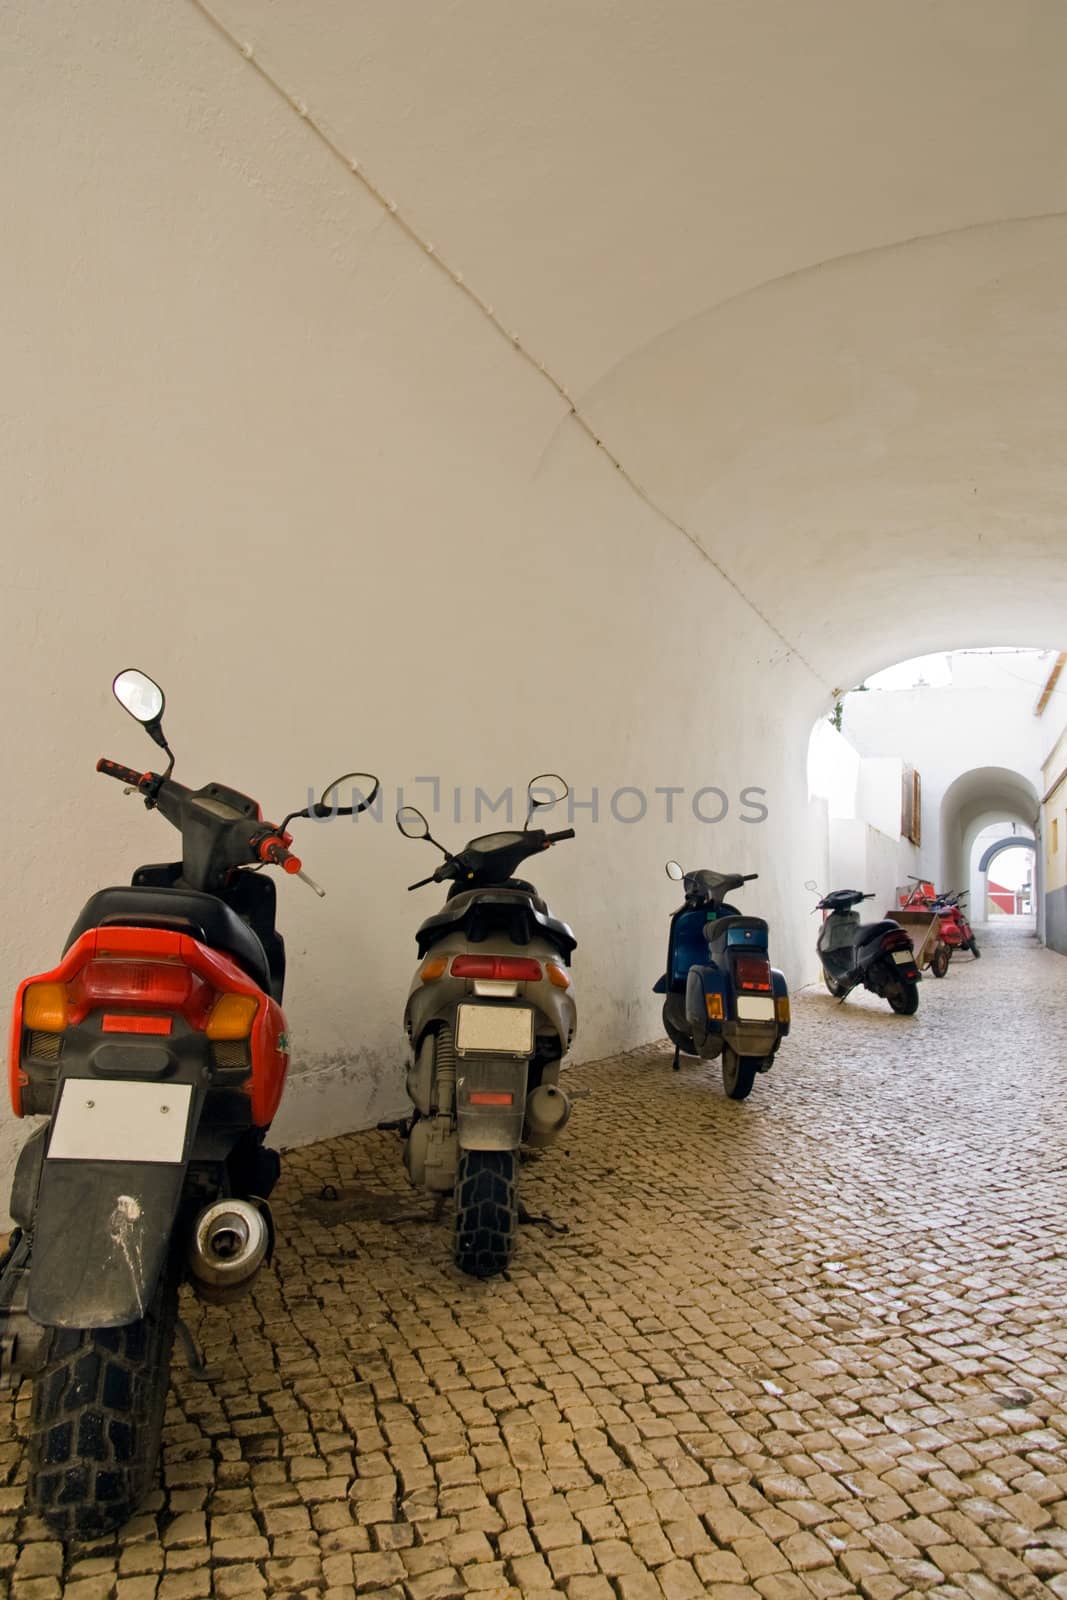 A line-up of motorcycles along a tunneled Portuguese street.